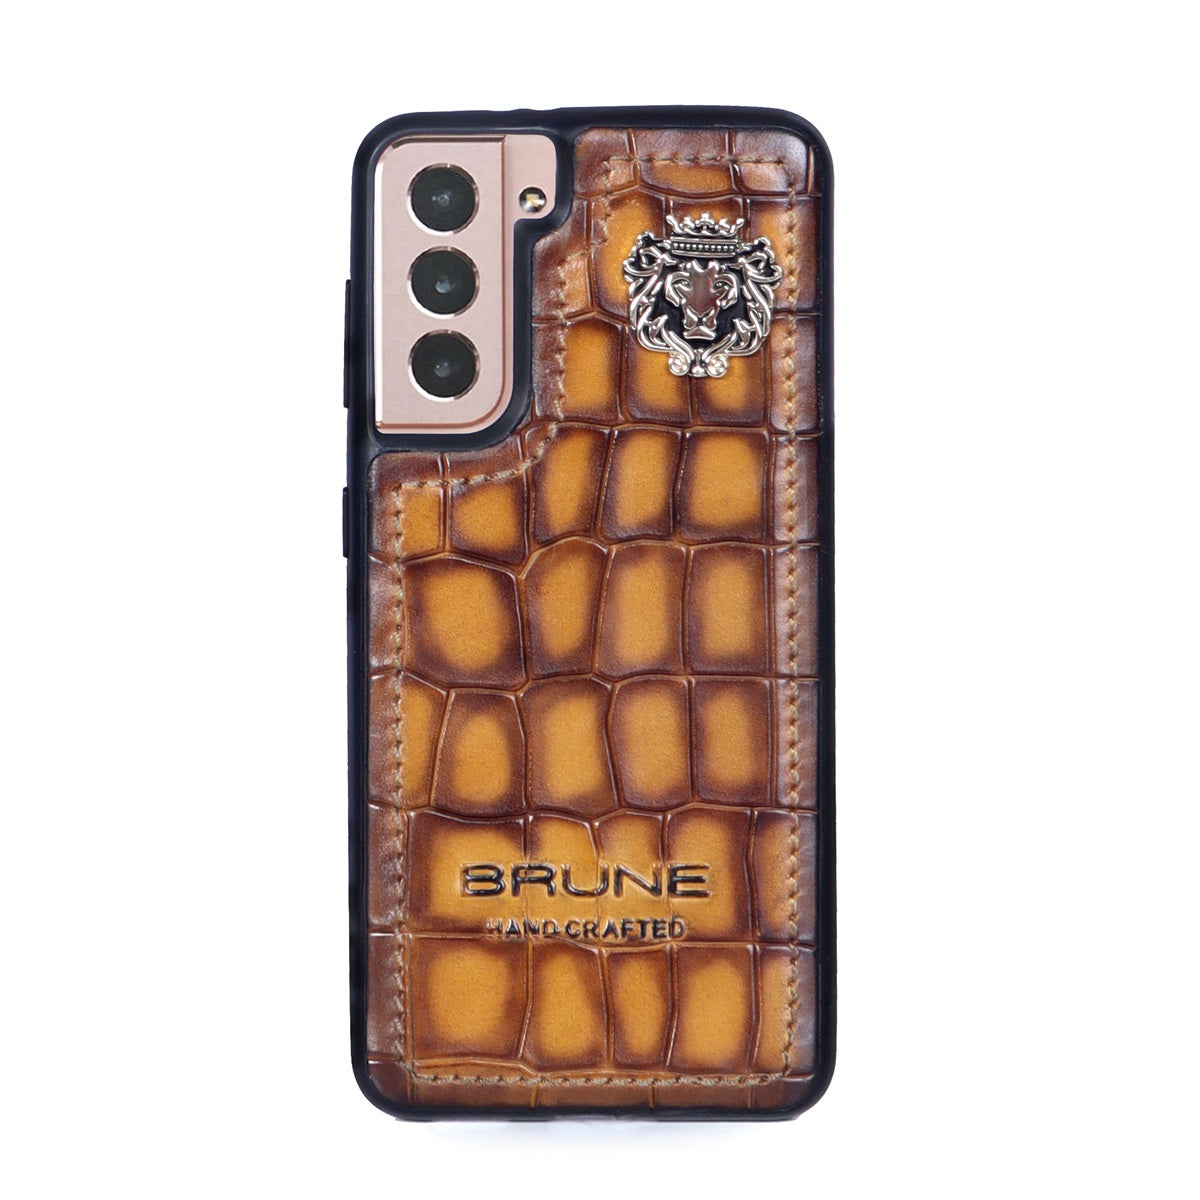 Smokey Tan Samsung S Series Deep Cut Leather Mobile Cover With Metal Lion Logo